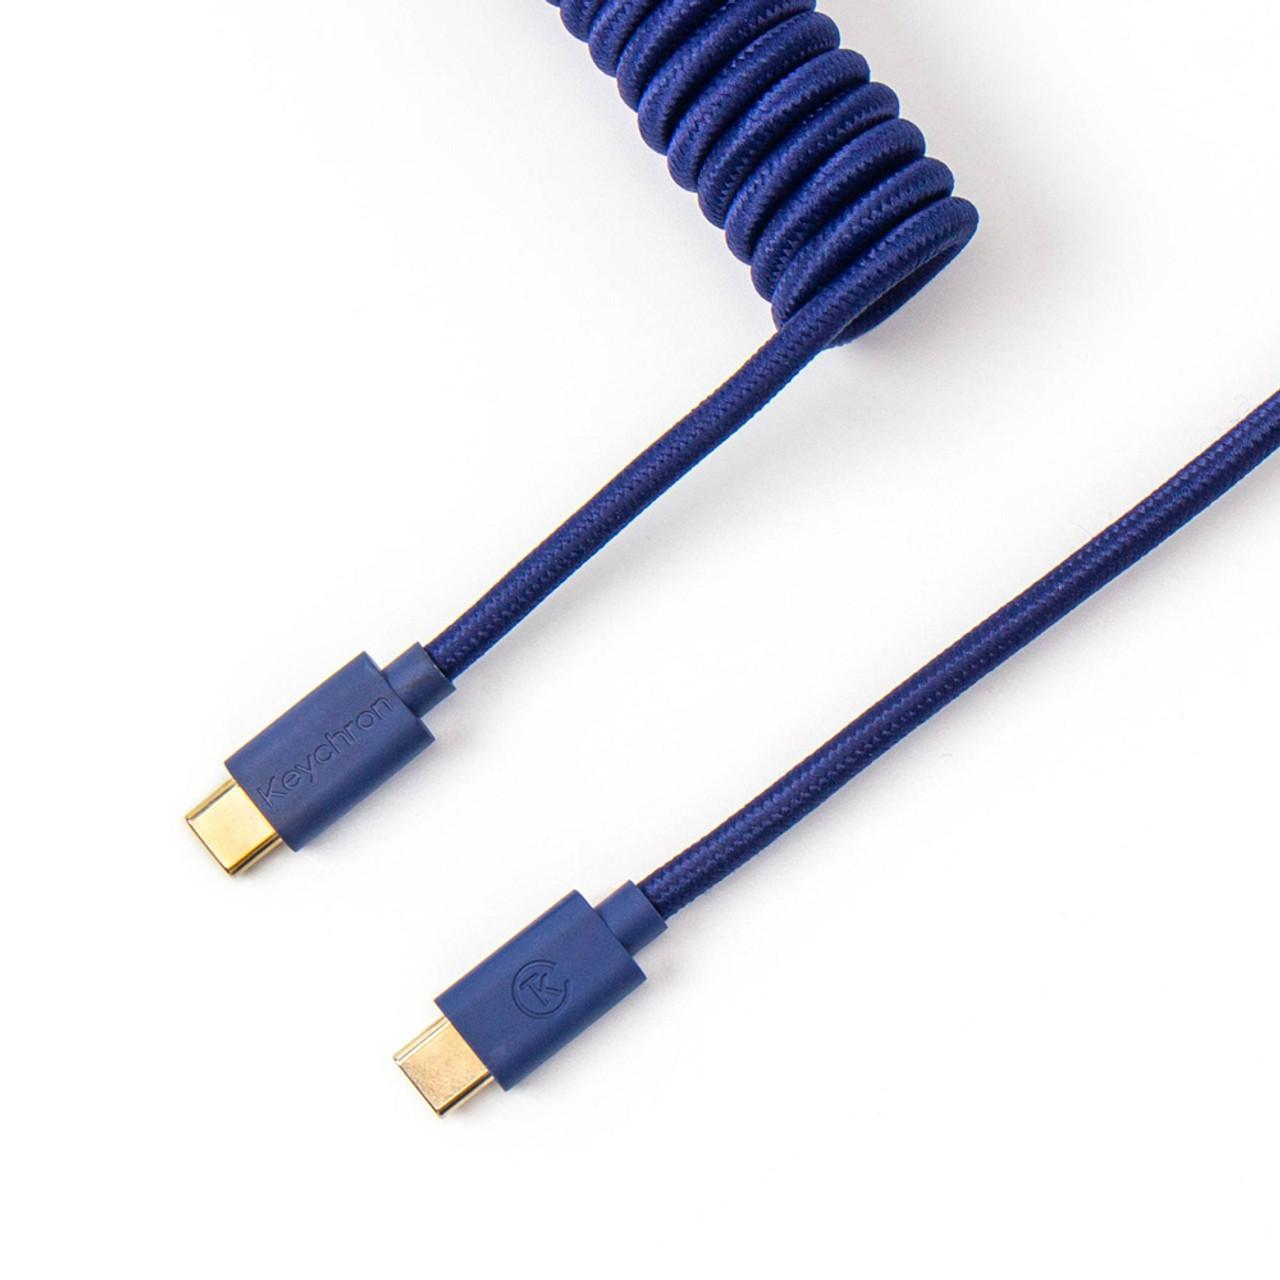 Buy Custom Coiled Keyboard USB Cable With Aviator Connector